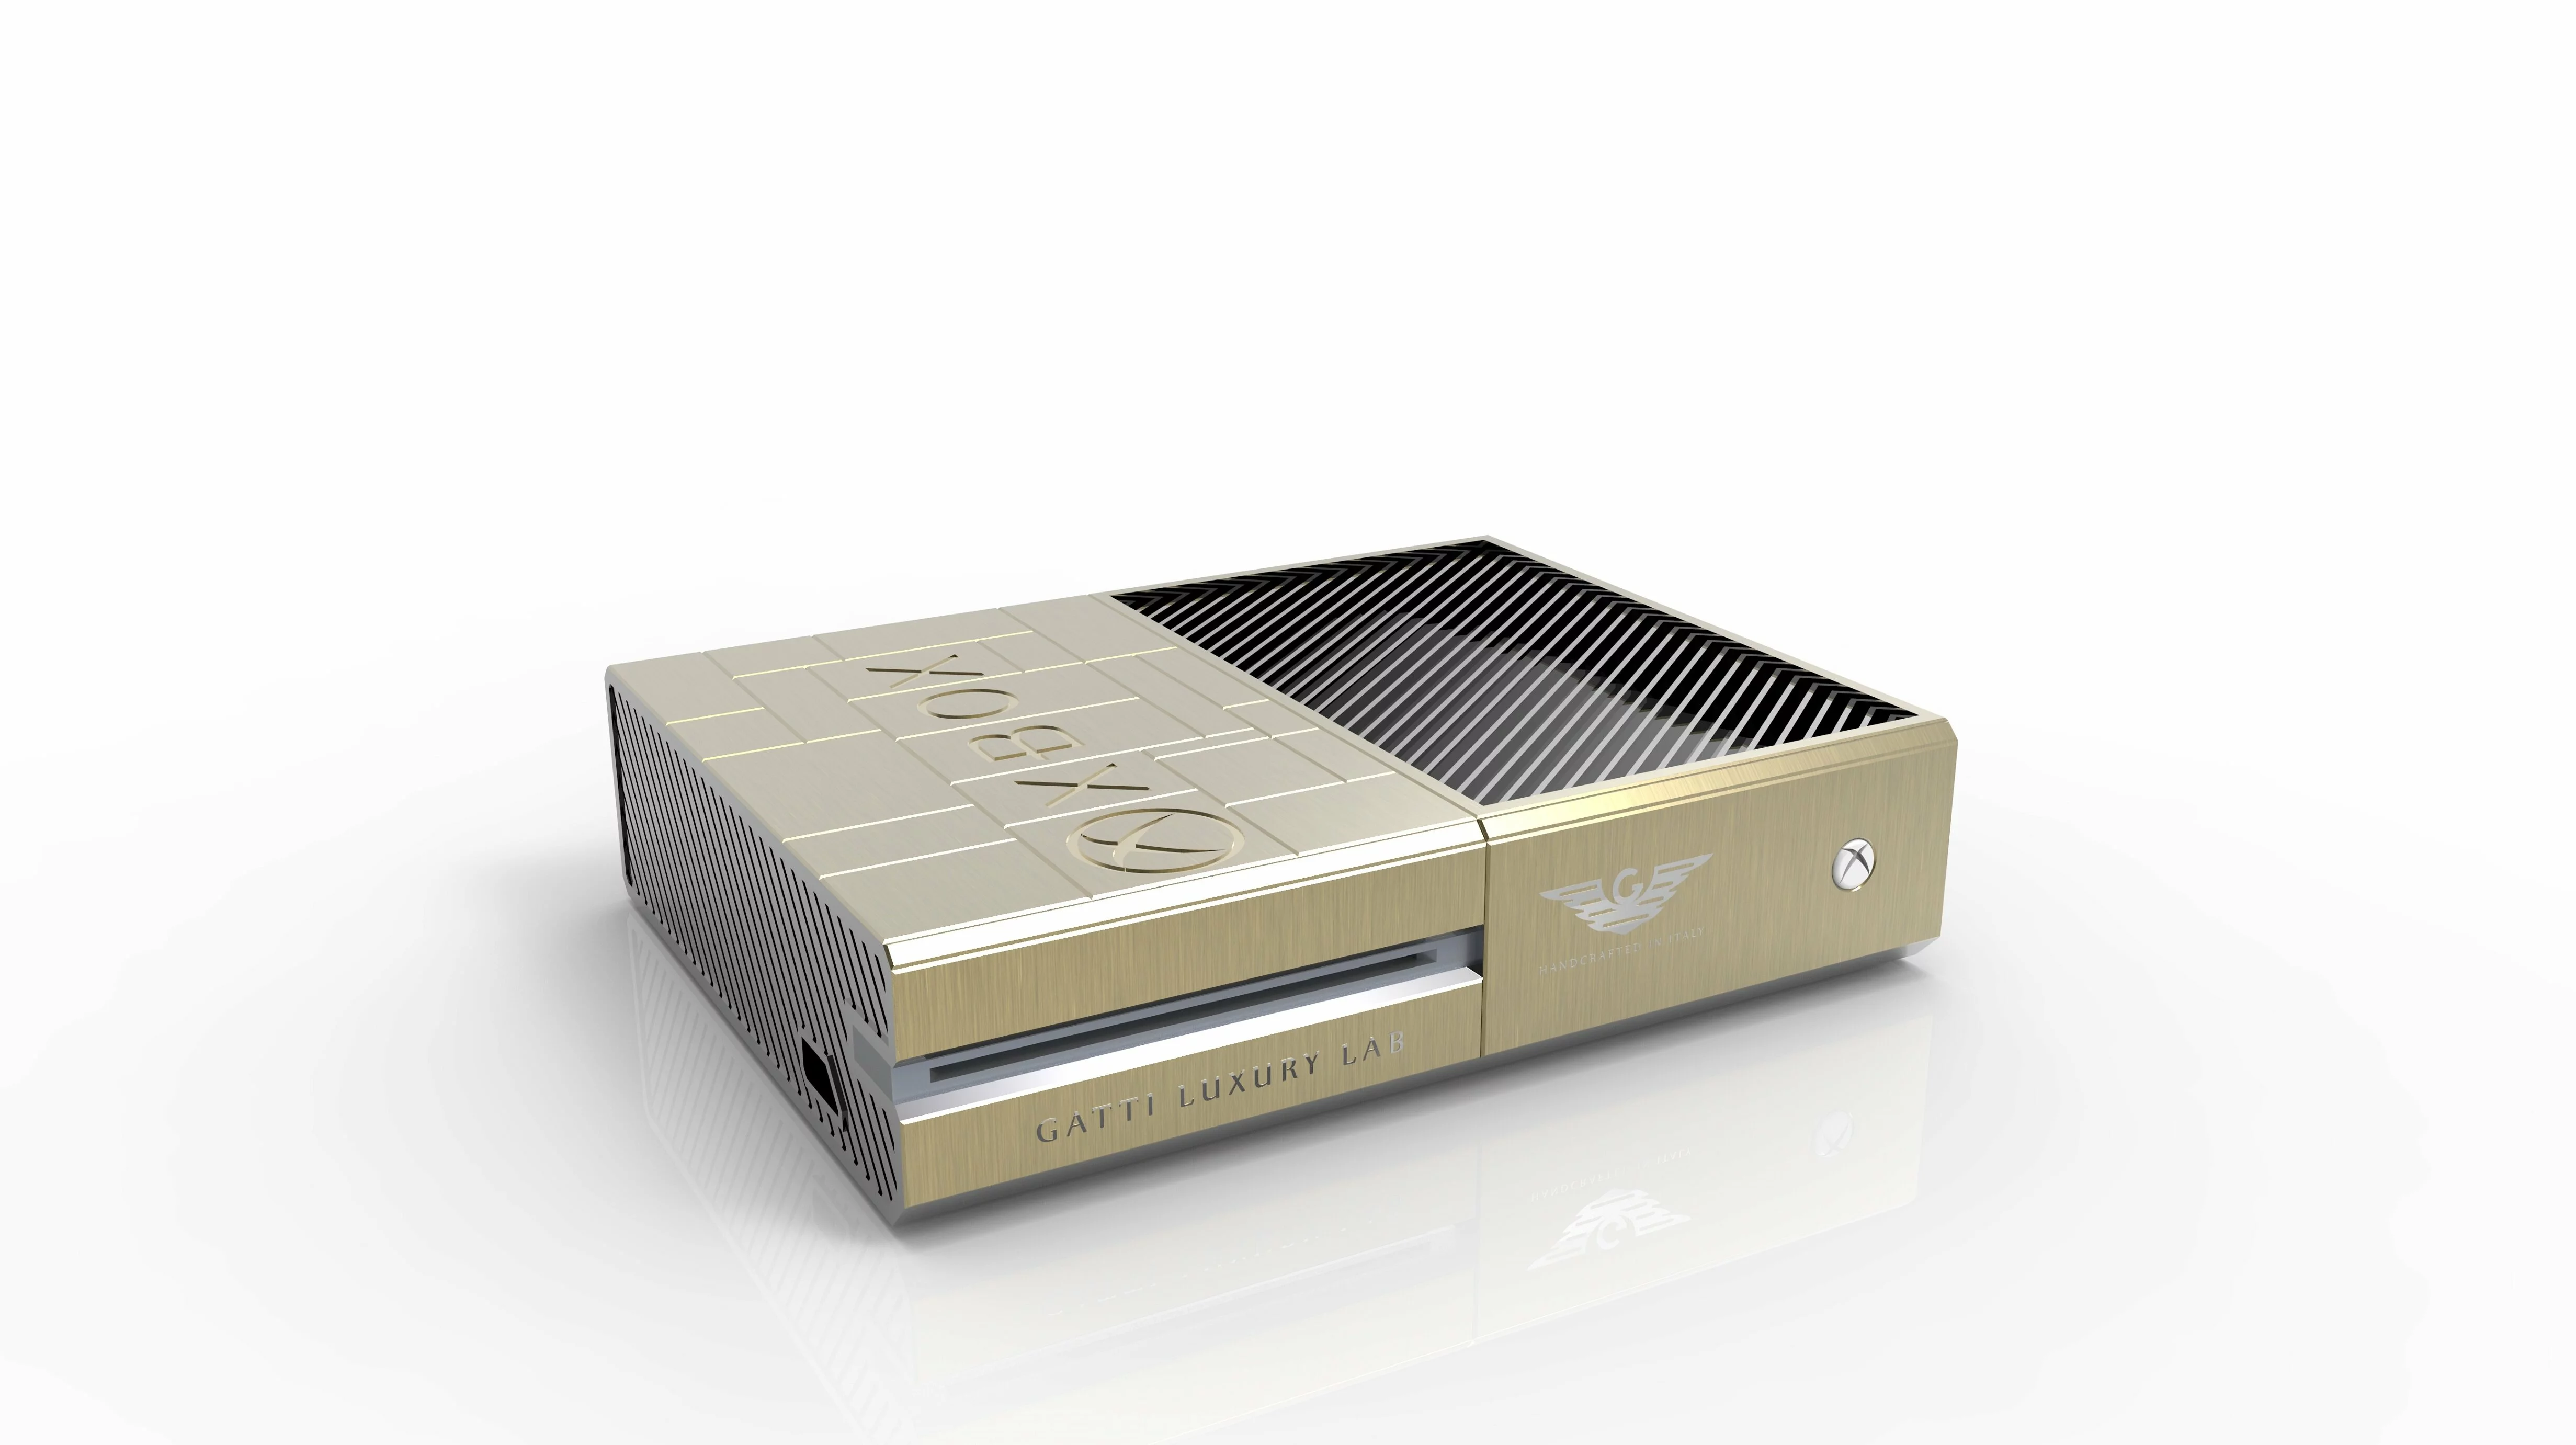 Jumbo-unveils-gold-Xbox-console-at-Games14_2